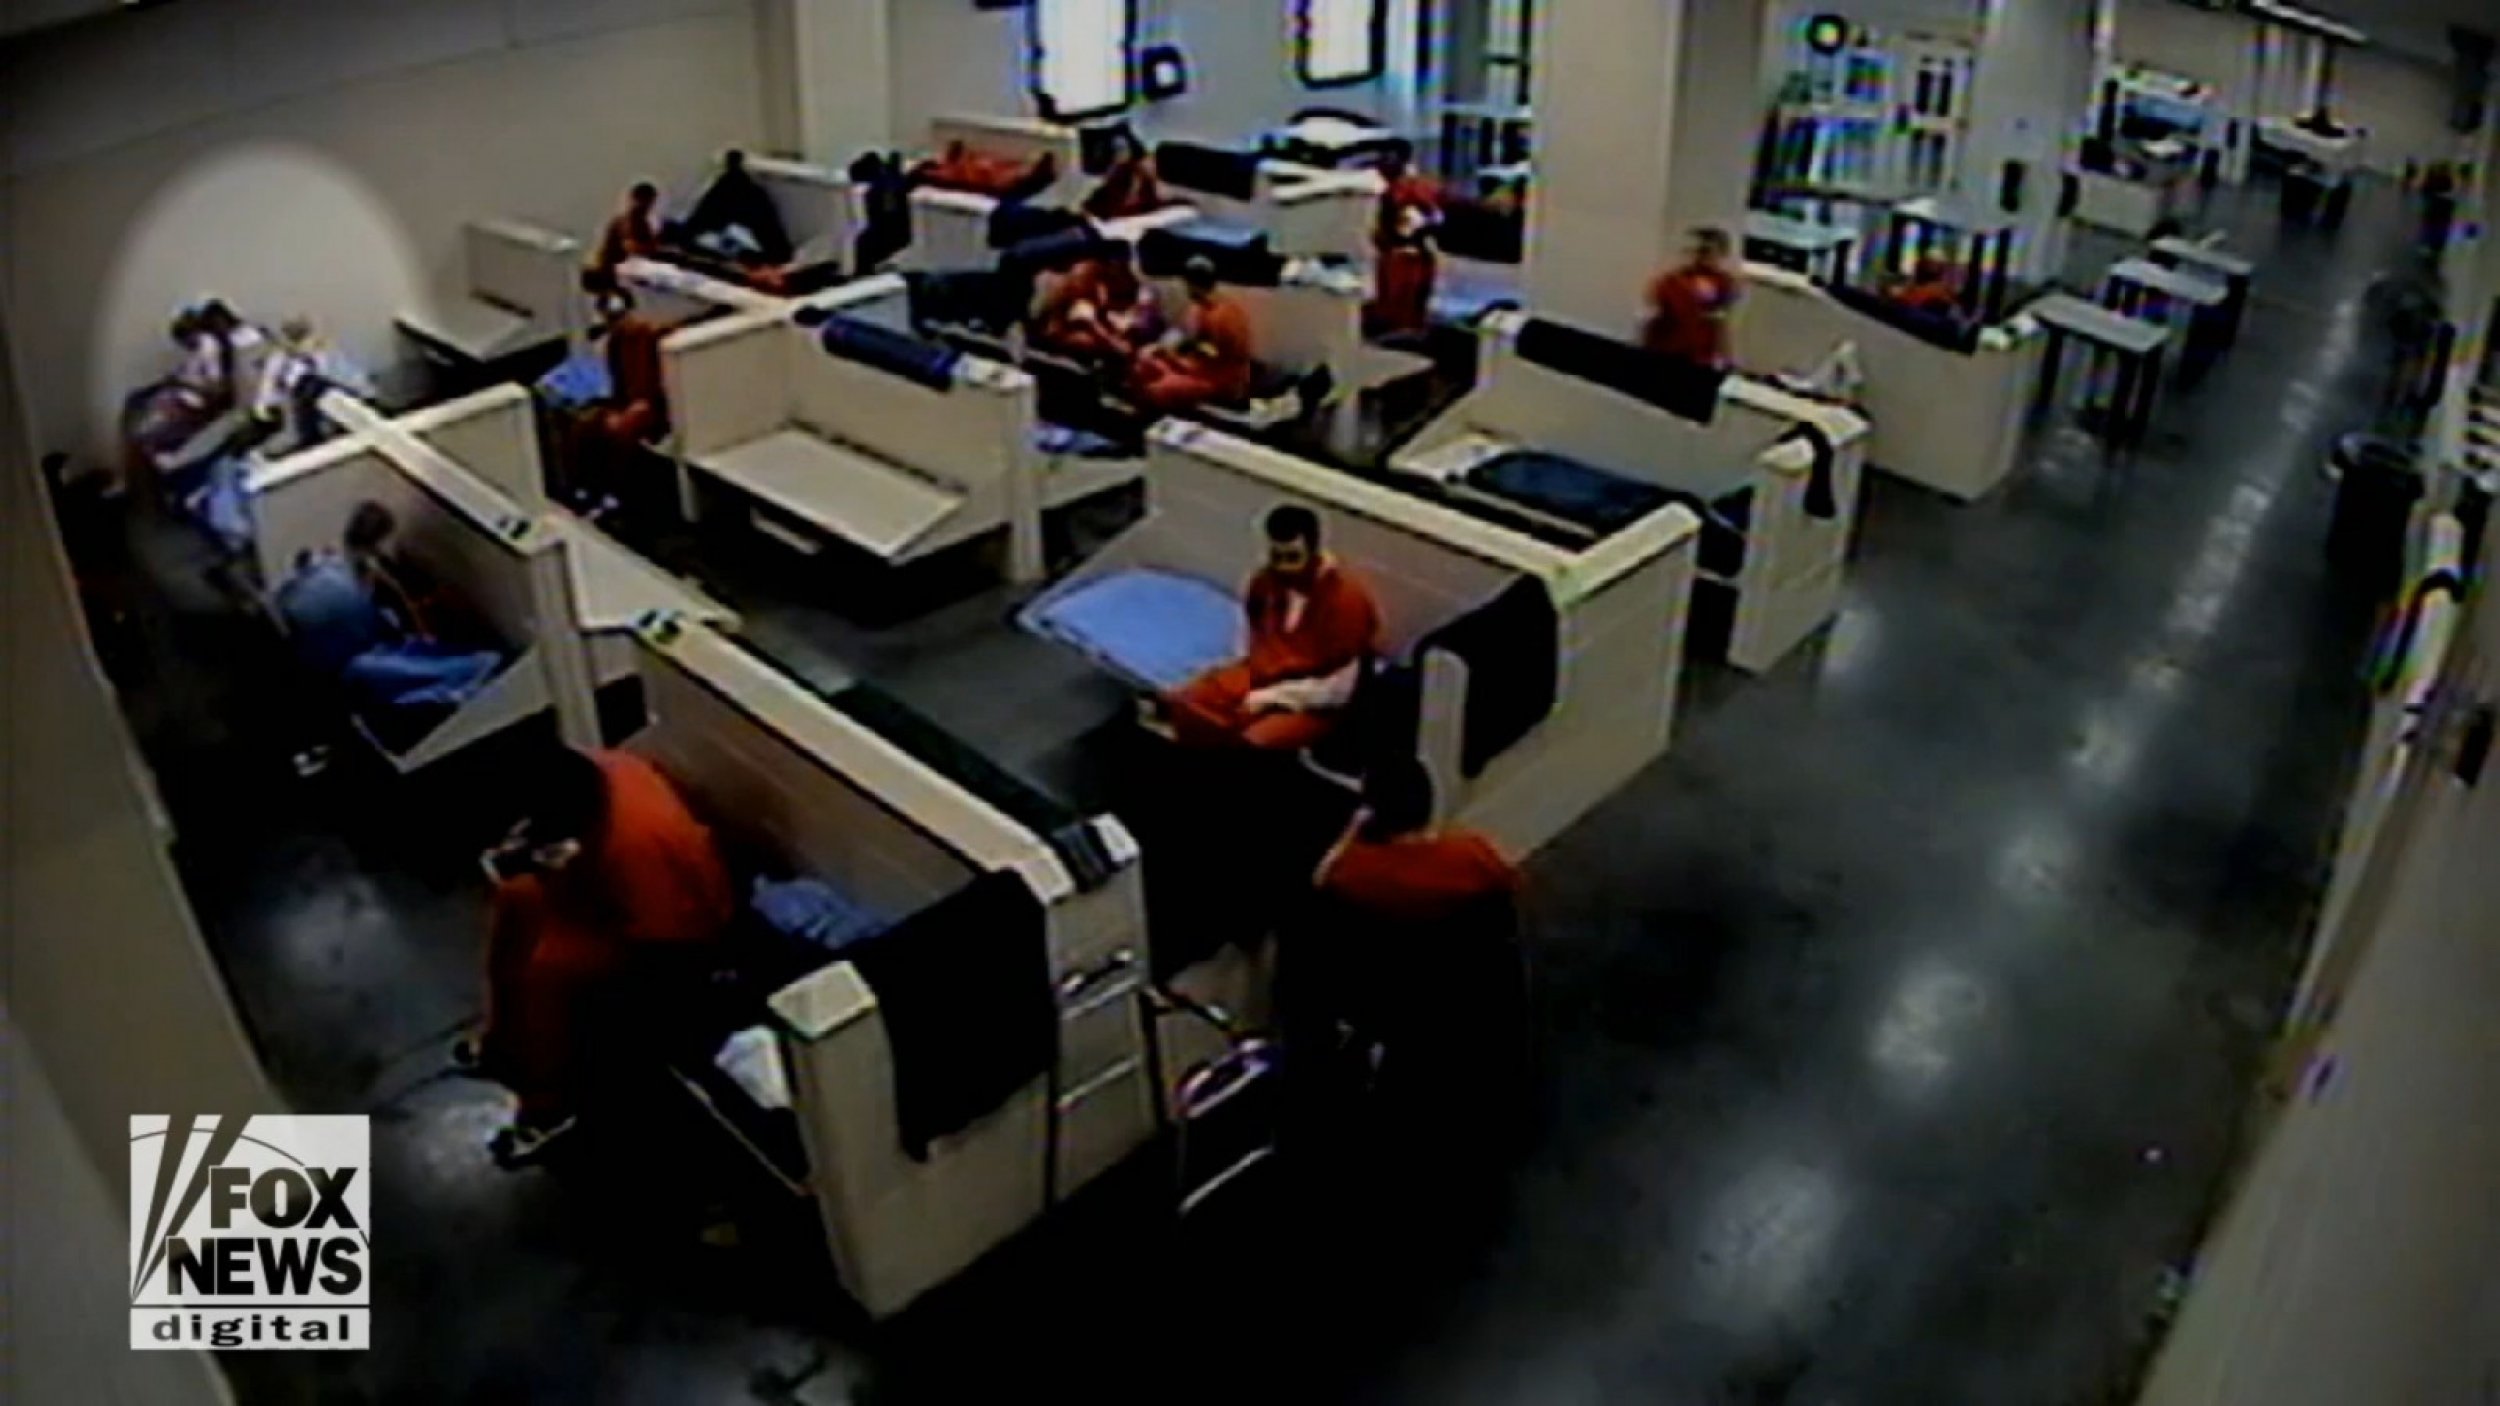 Florida Deputy Fired After poking And Slapping Wheelchair-bound Inmate